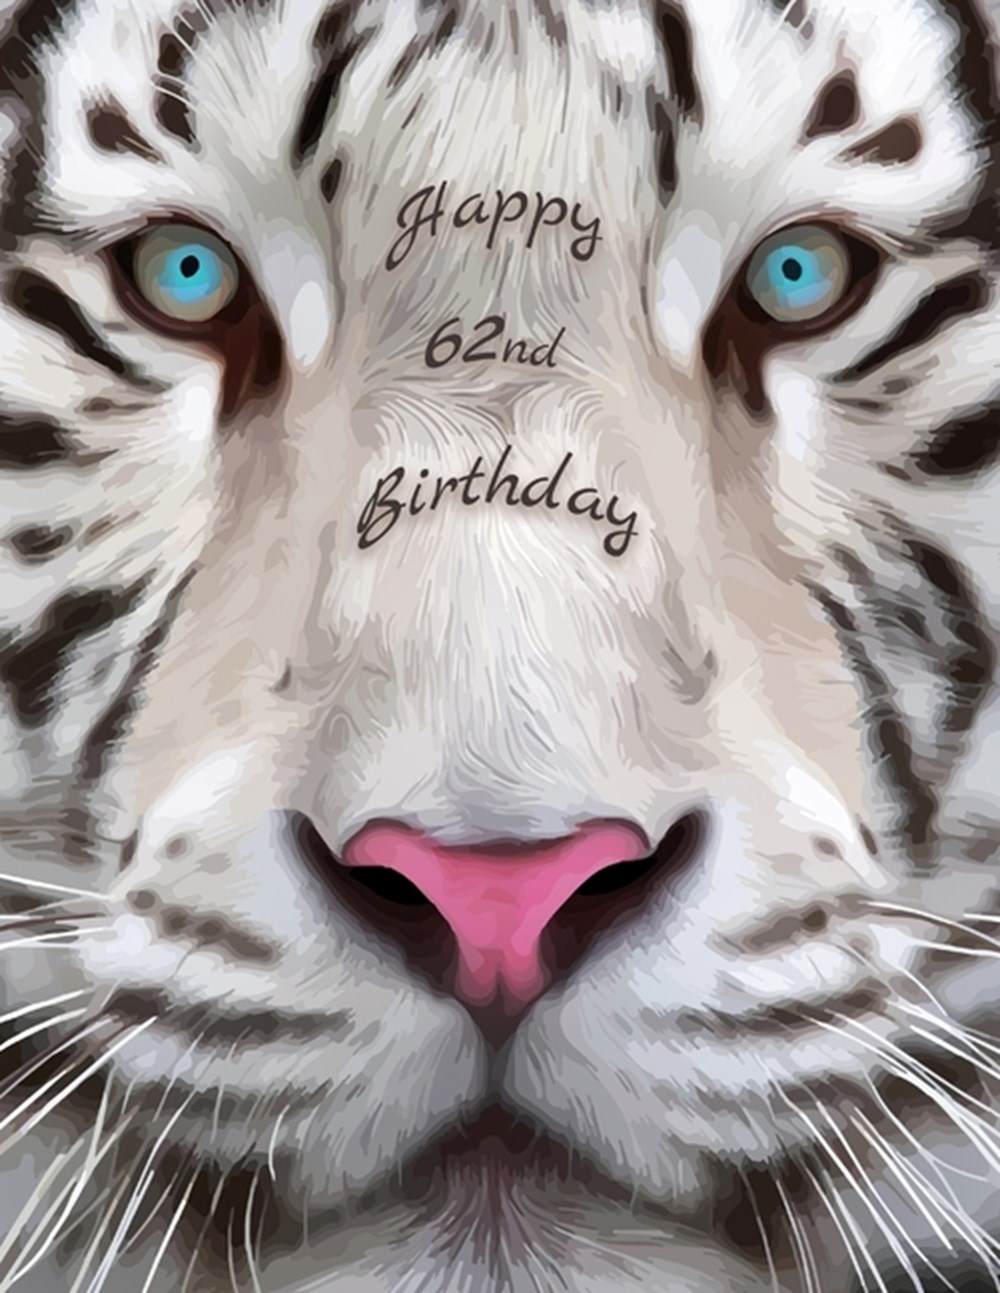 Happy 62nd Birthday: Large Print Phone Number and Address Book for Seniors with Beautiful White Tige